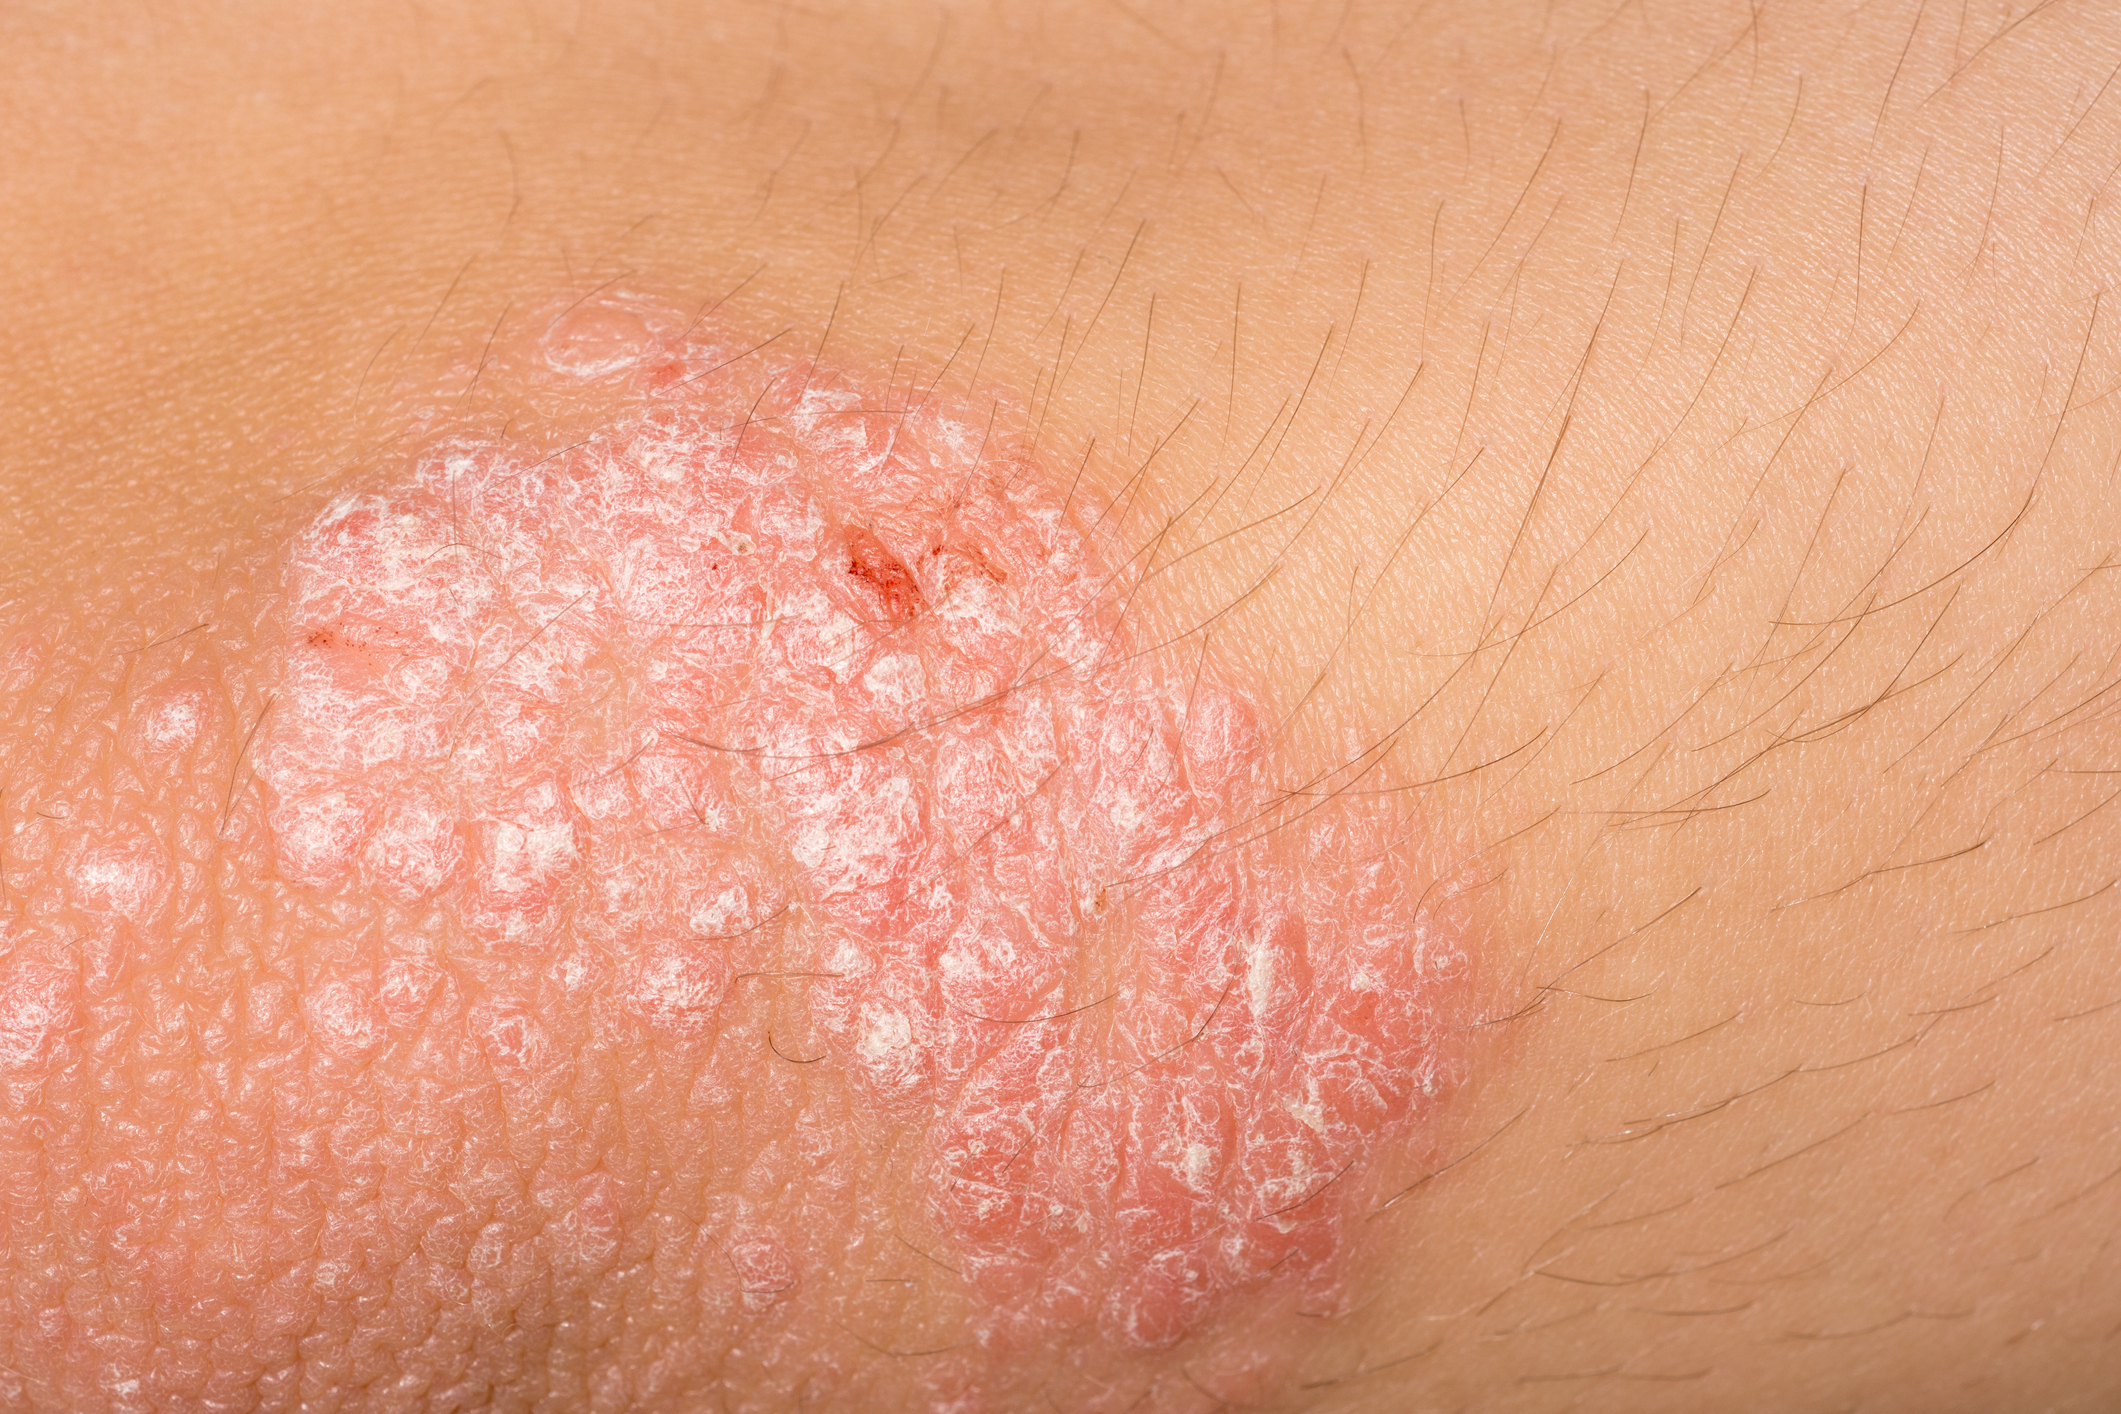 can psoriasis be contagious